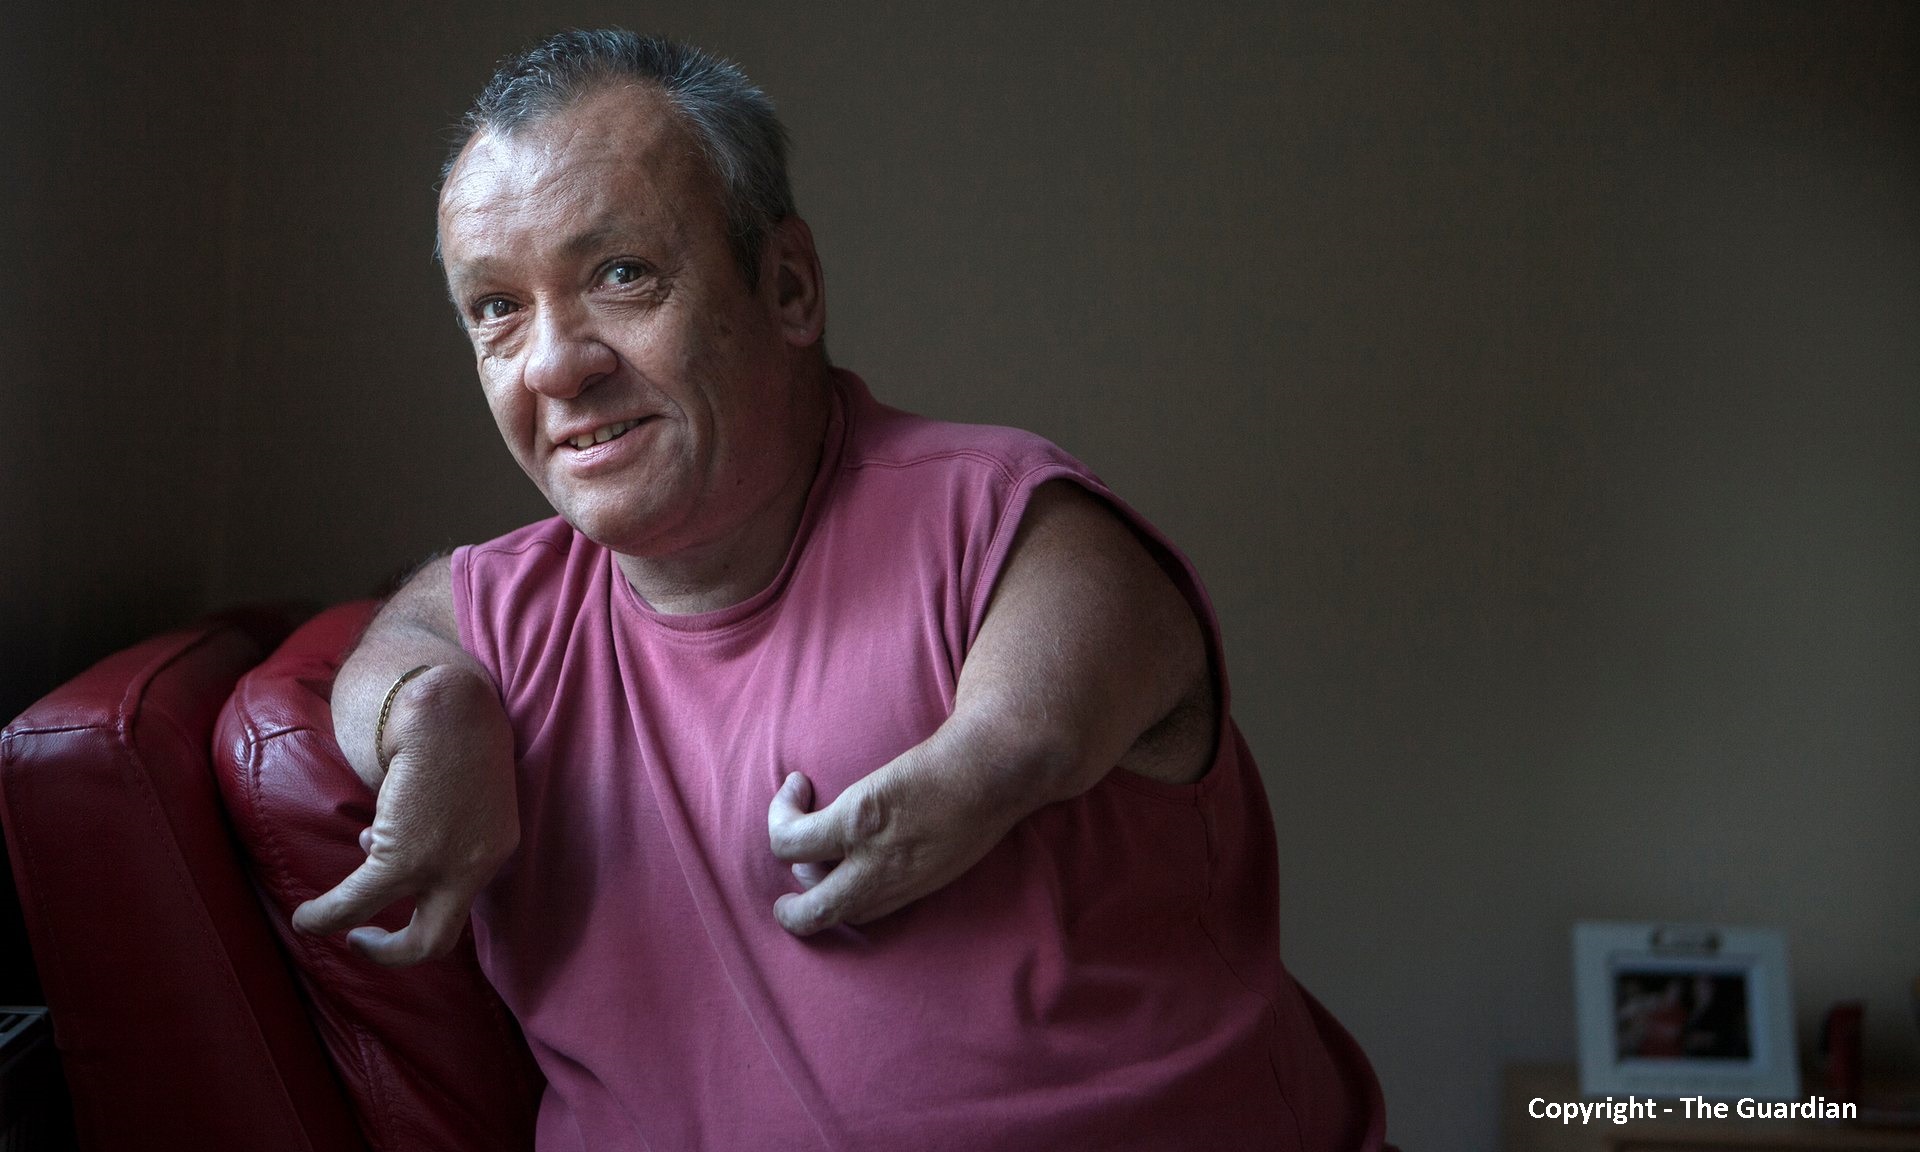 Phil Spanswick, whose disabilities were caused in the womb by the use of the thalidomide drug, had his PIP cut and his condition classed as ‘genetic’. Photograph: Tom Pilston for the Guardian